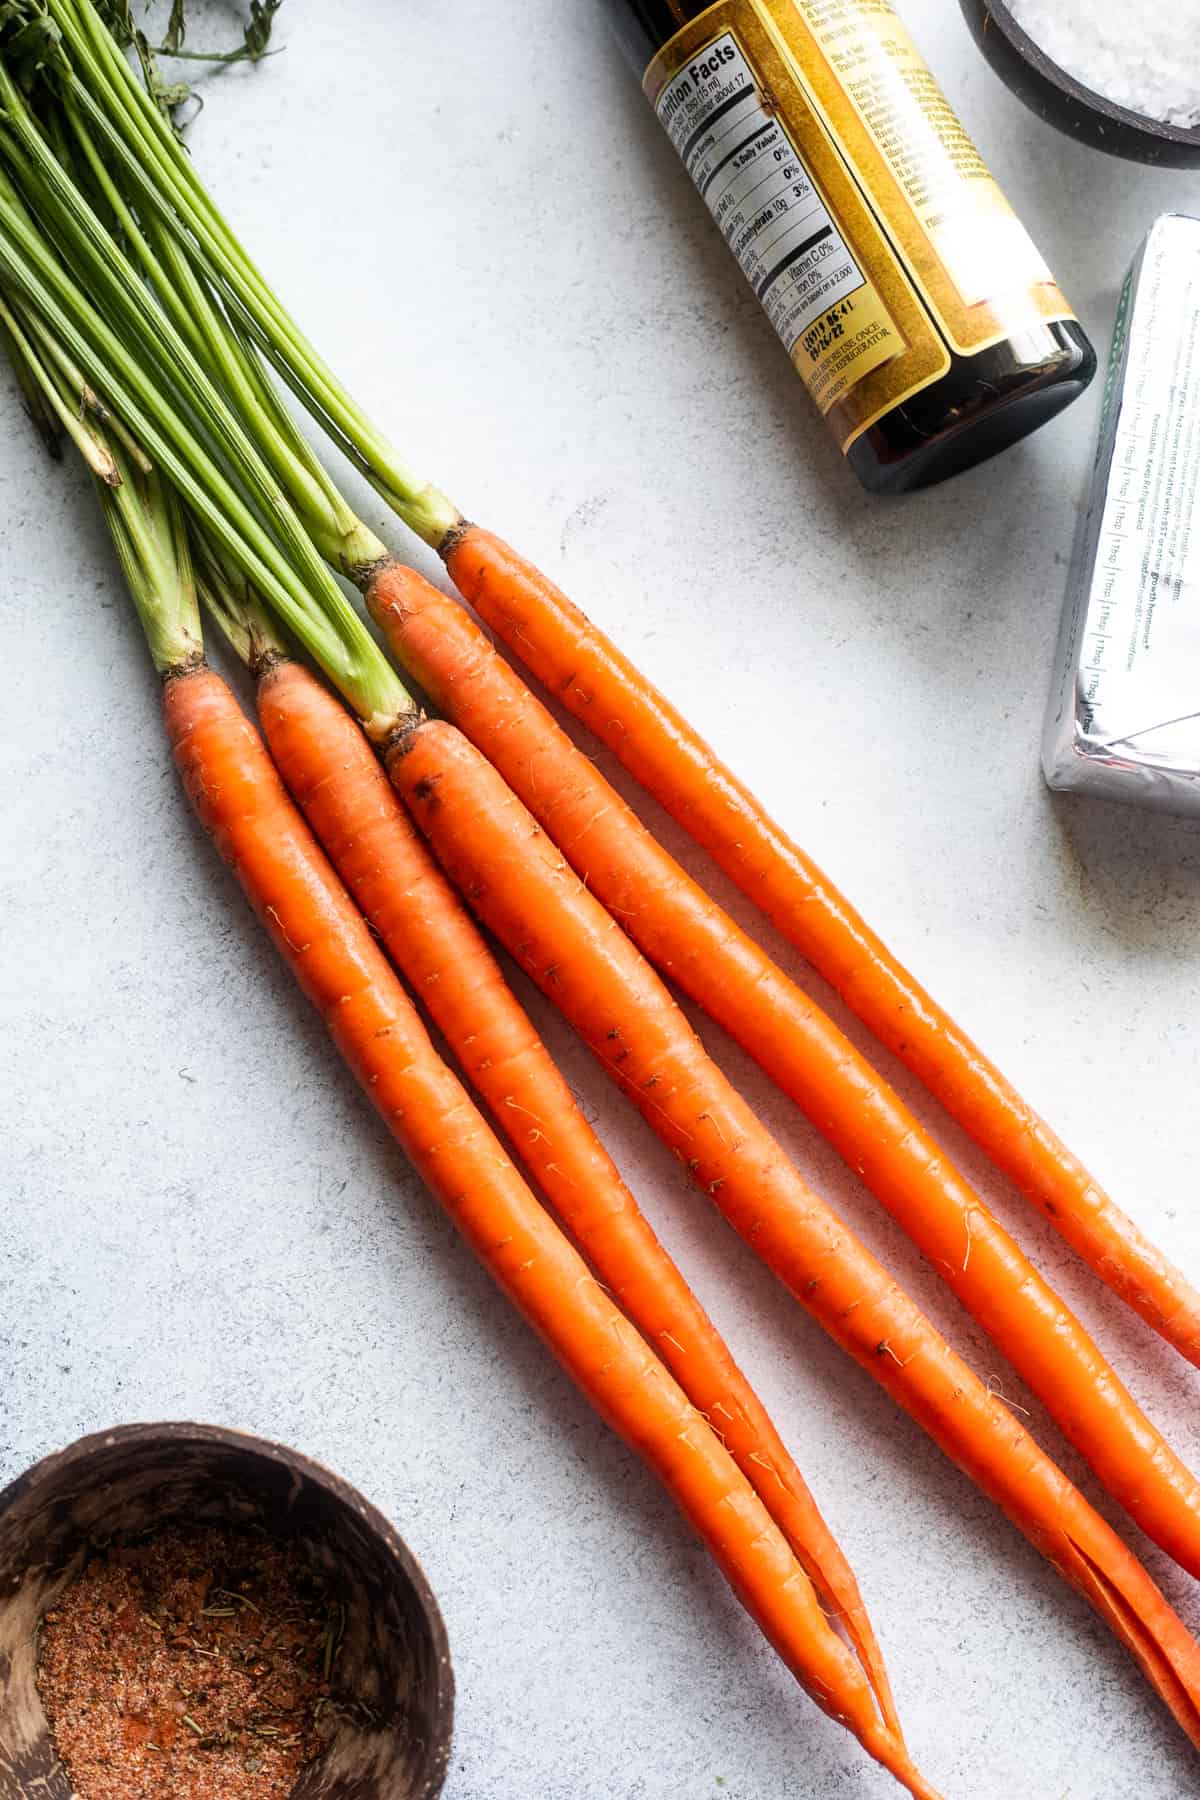 five long carrots with green stalks arranged on a white background with balsamic vinegar and a seasonings mixture placed around the carrots.